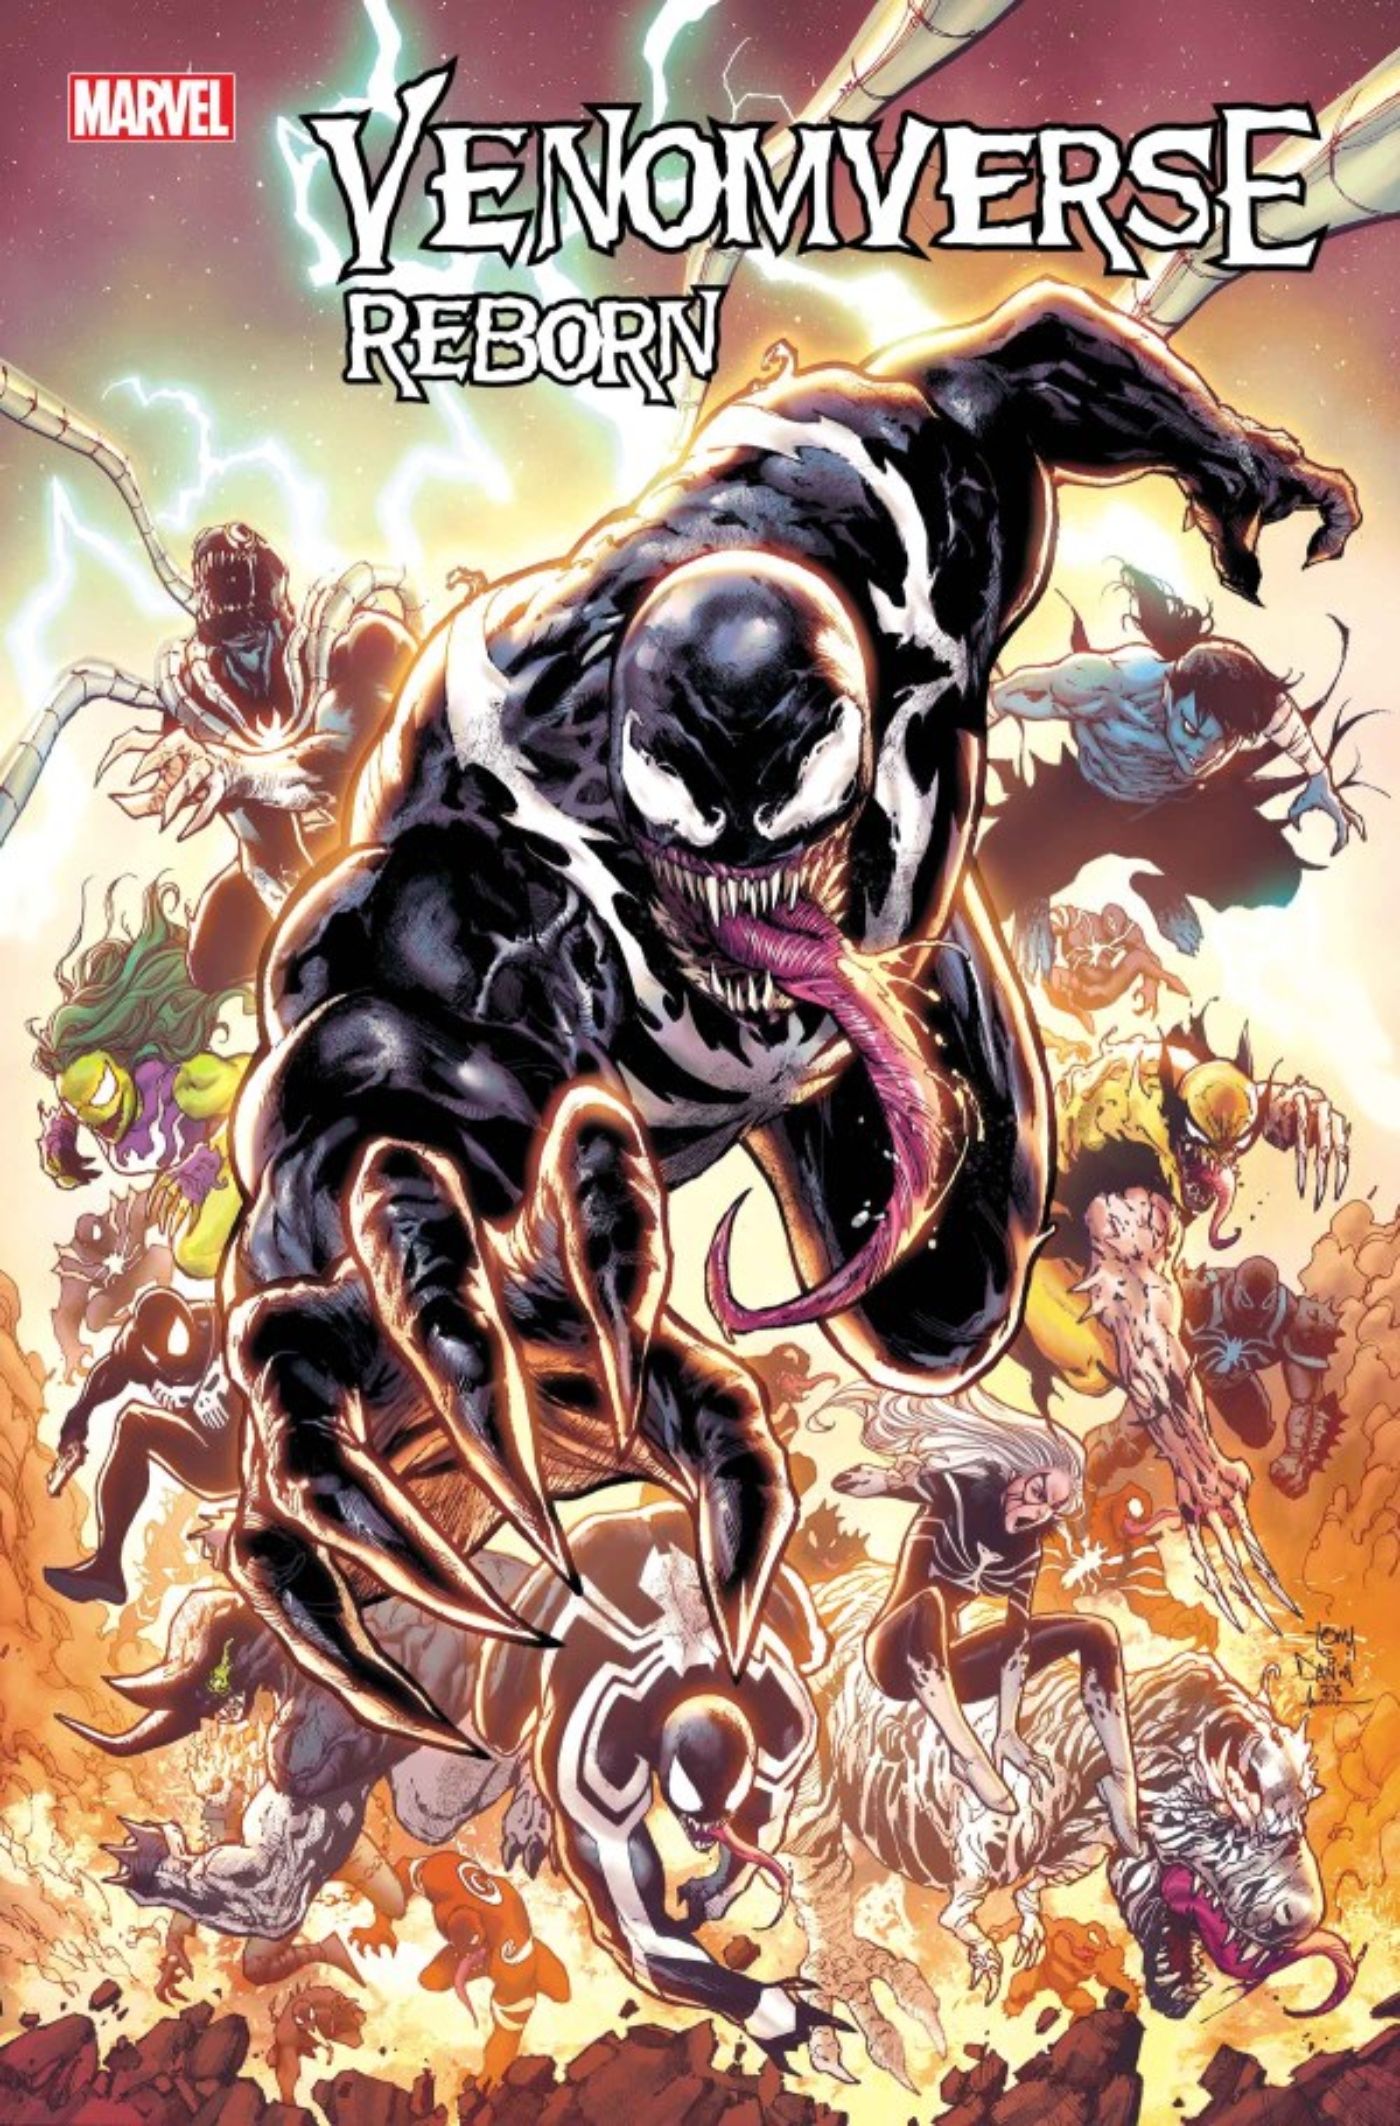 Venomverse Reborn #1 cover featuring multiple versions of Venom from across the multiverse.